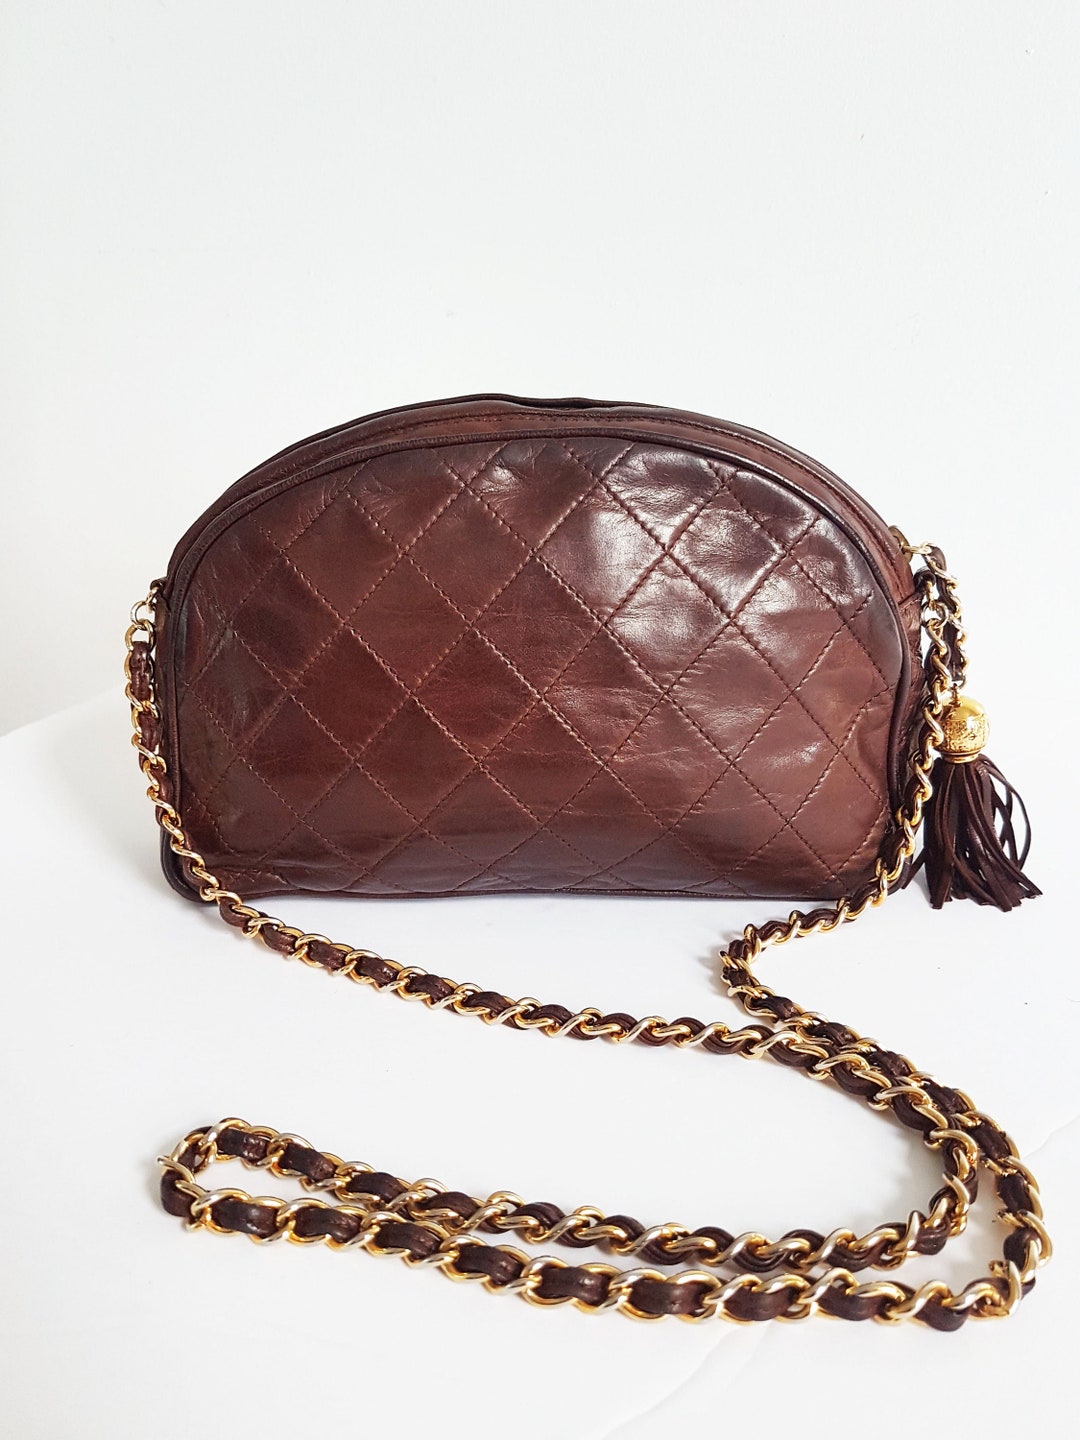 100% Authentic 1980s Chanel Brown Leather Bag. Chanel Quilted Leather ...